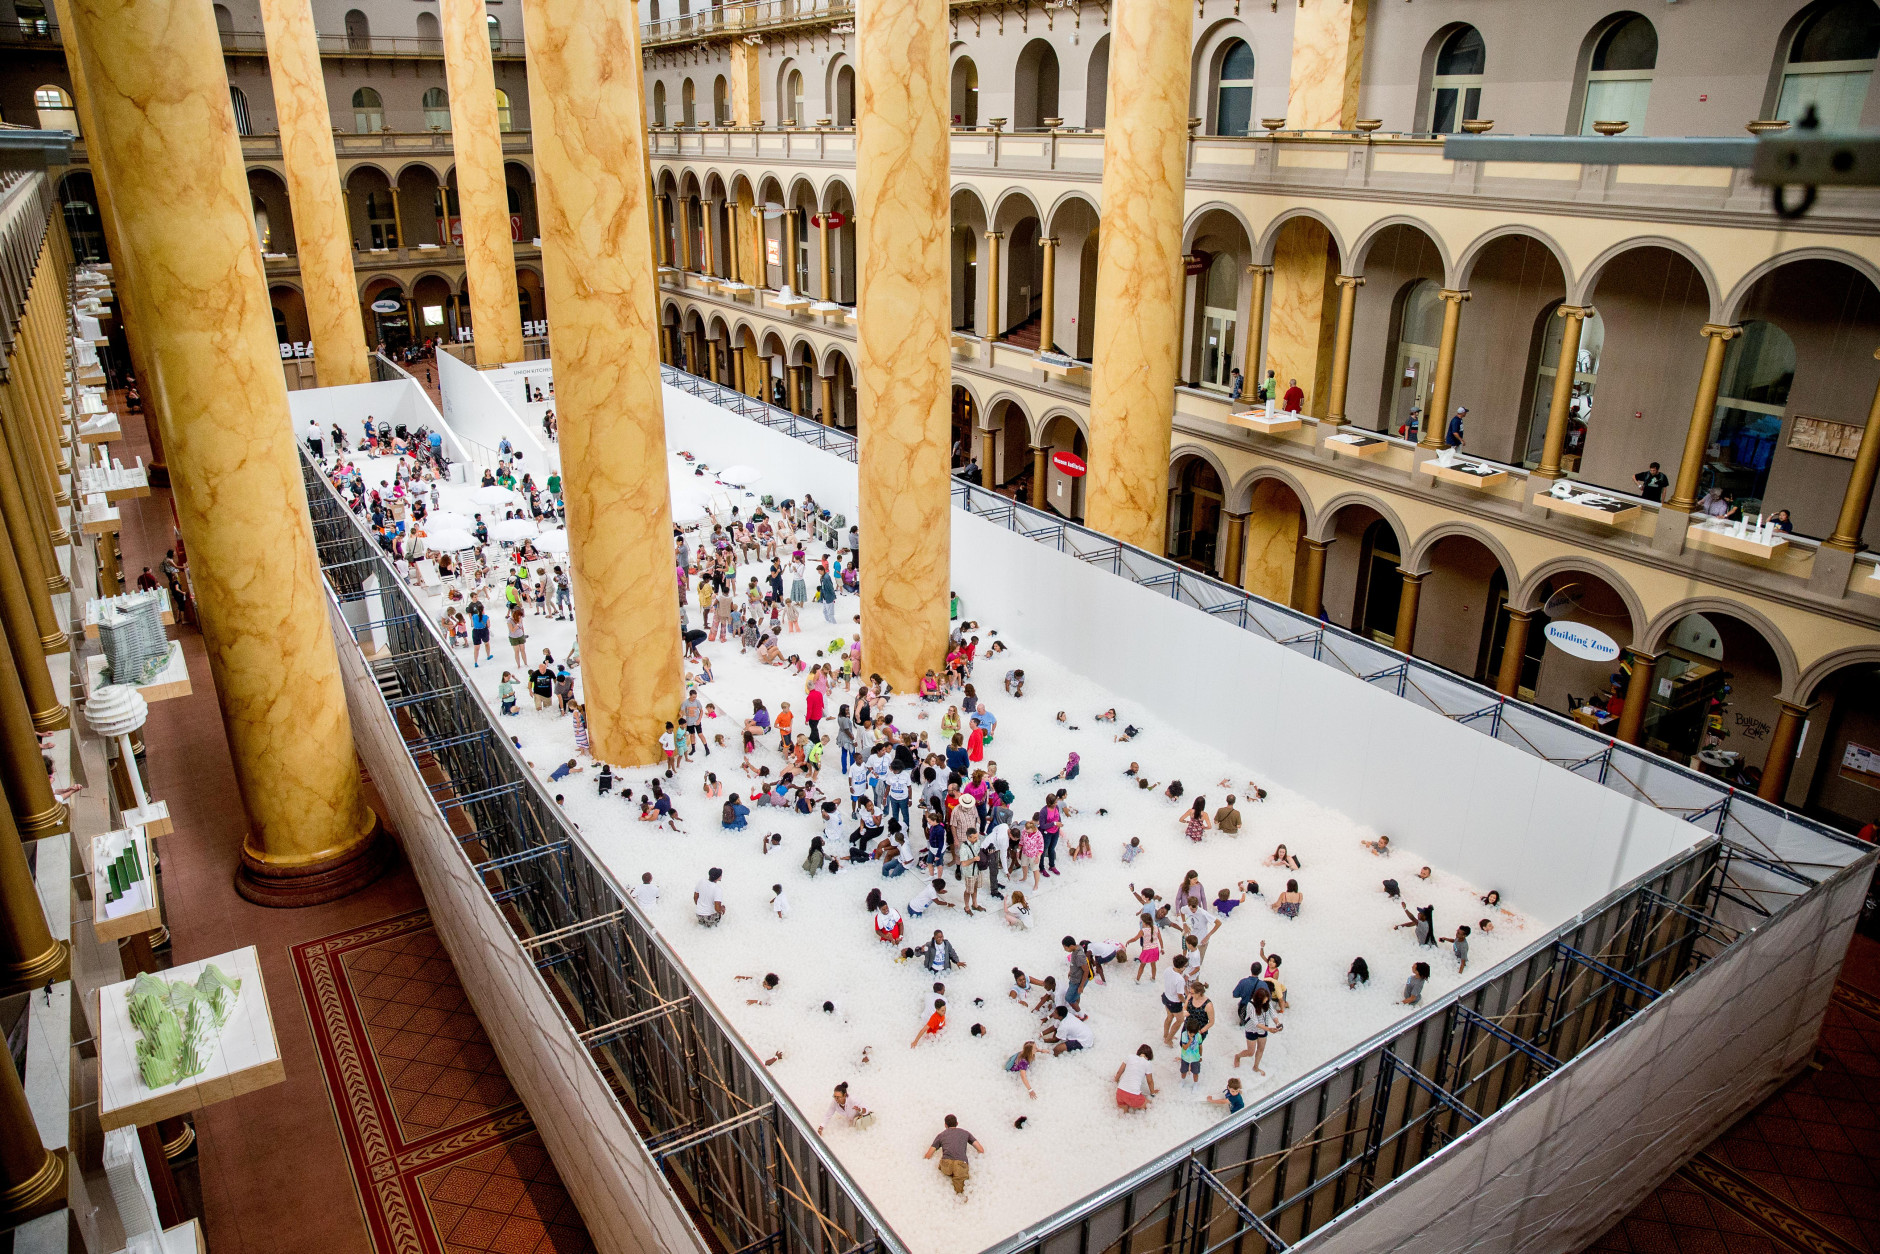 Visitors enjoy "The Beach", an interactive architectural installation inside the National Building Museum in Washington, Friday, July 17, 2015. The Beach, which spans the length of the museum's Great Hall, was created in partnership with Snarkitecture, and covers 10,000 square feet and includes an ocean of nearly one million recyclable translucent plastic balls. (AP Photo/Andrew Harnik)